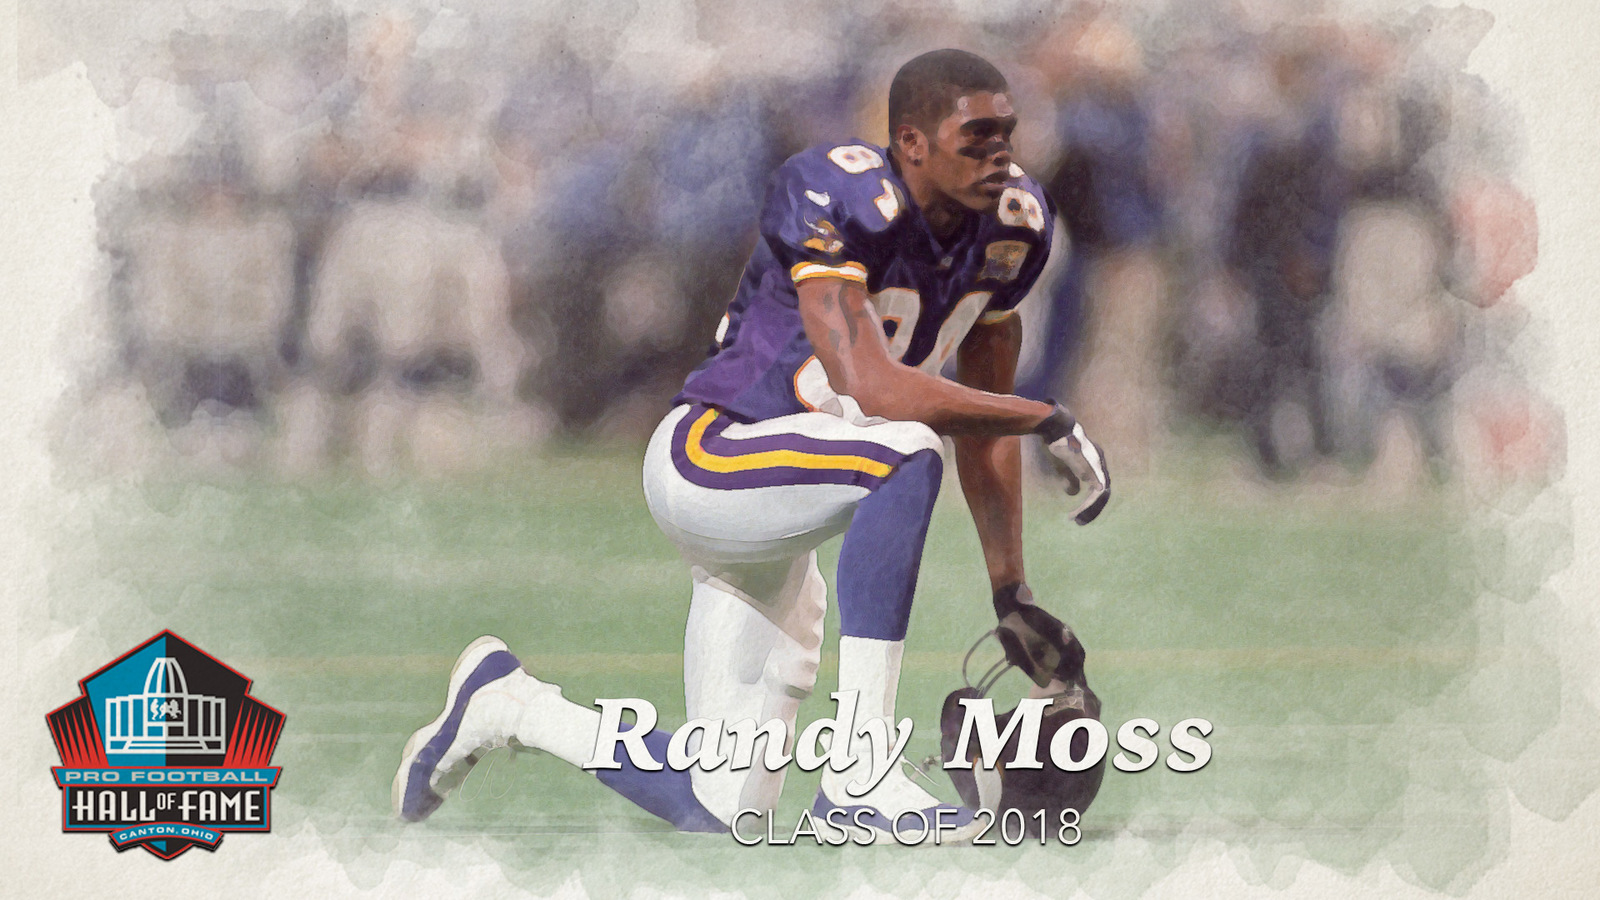 Randy Moss Vikings Wallpaper posted by Michelle Johnson